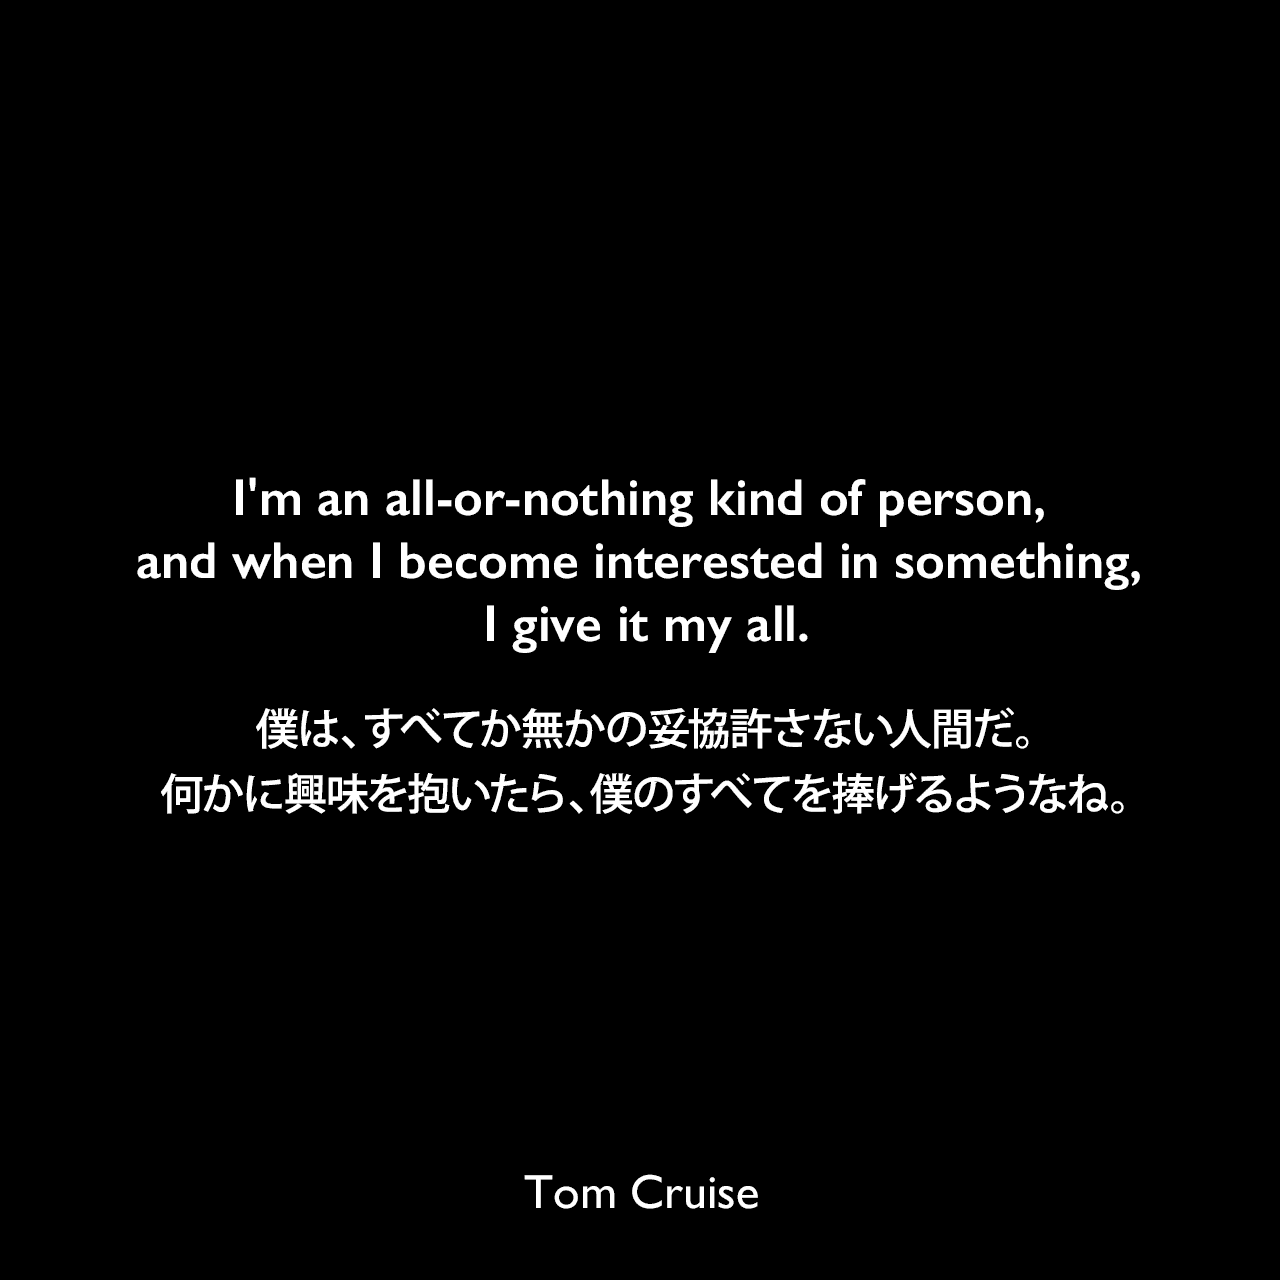 I'm an all-or-nothing kind of person, and when I become interested in something, I give it my all.僕は、すべてか無かの妥協許さない人間だ。何かに興味を抱いたら、僕のすべてを捧げるようなね。Tom Cruise